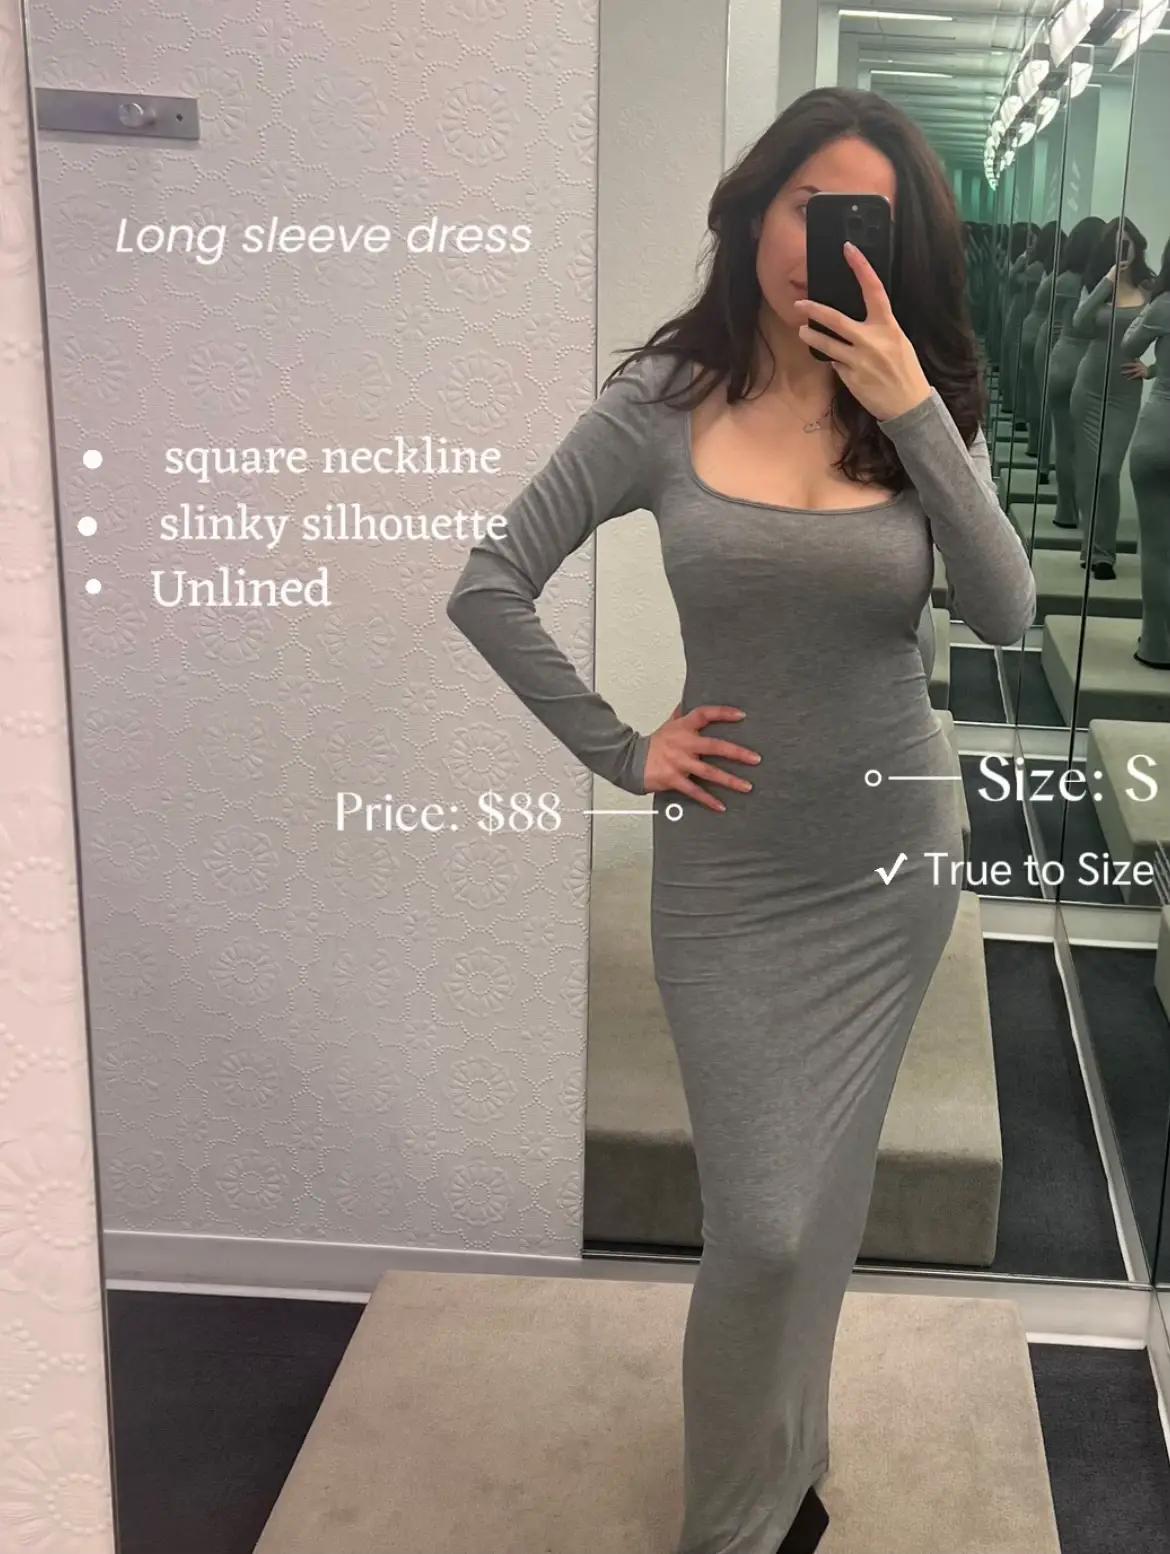 skims dress  Long sleeve dress outfit, Bodycon dress with sleeves, Body  con dress outfit